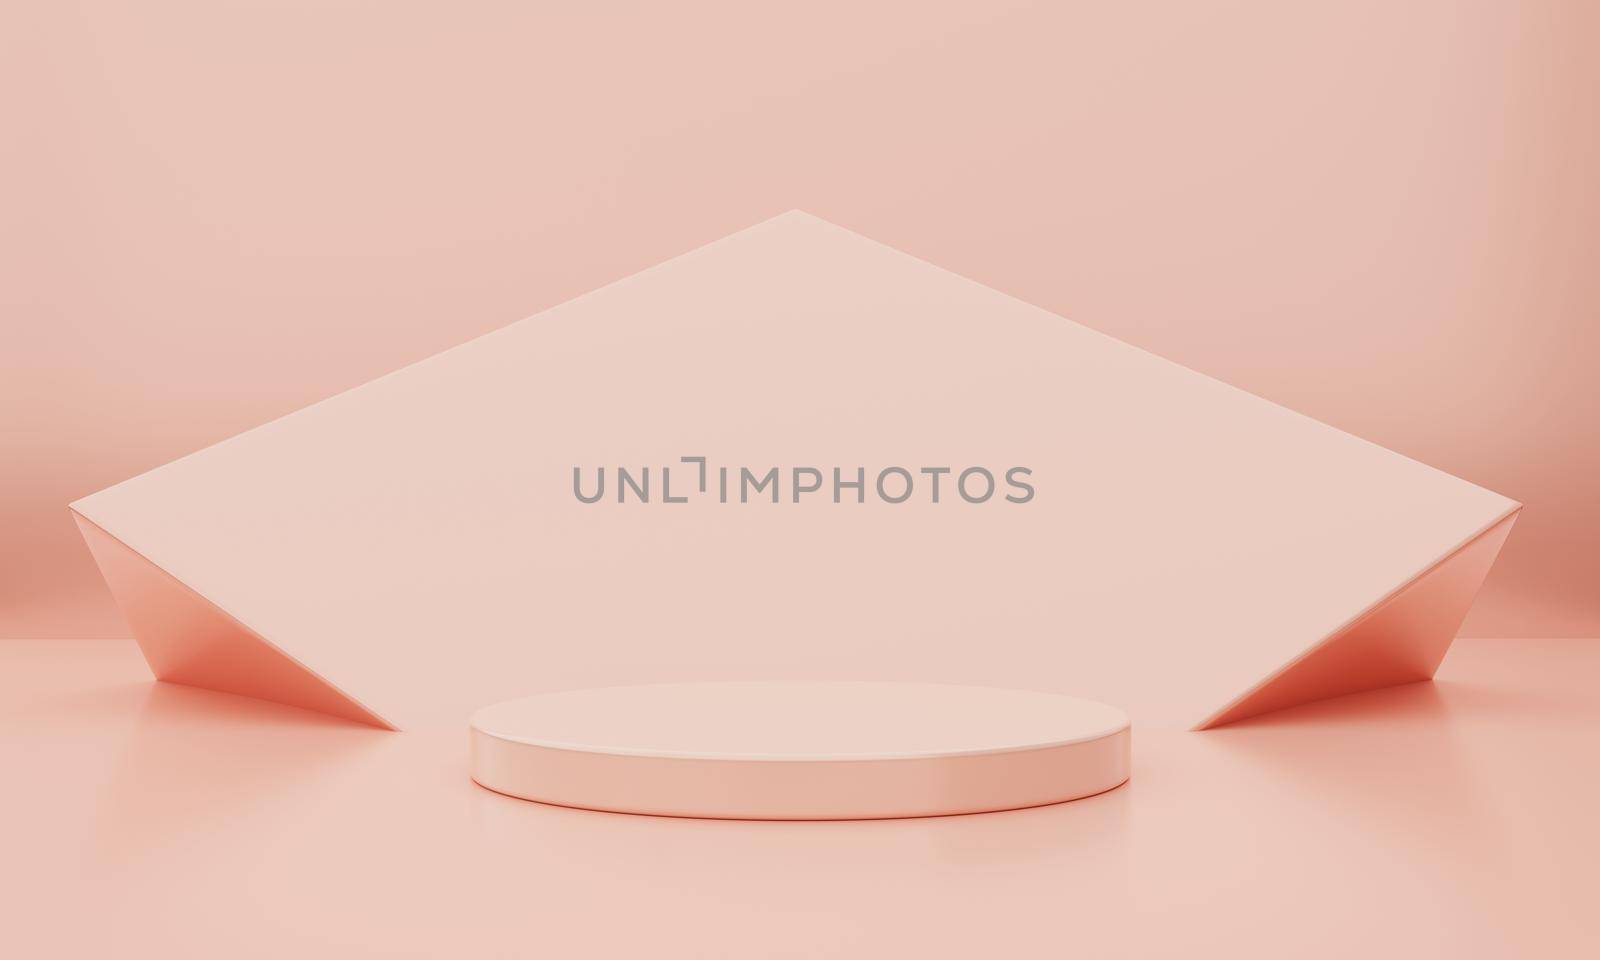 Minimal pink orange or coral color round cylinder podium stage background. Abstract object scene for advertisement concept. 3D illustration rendering